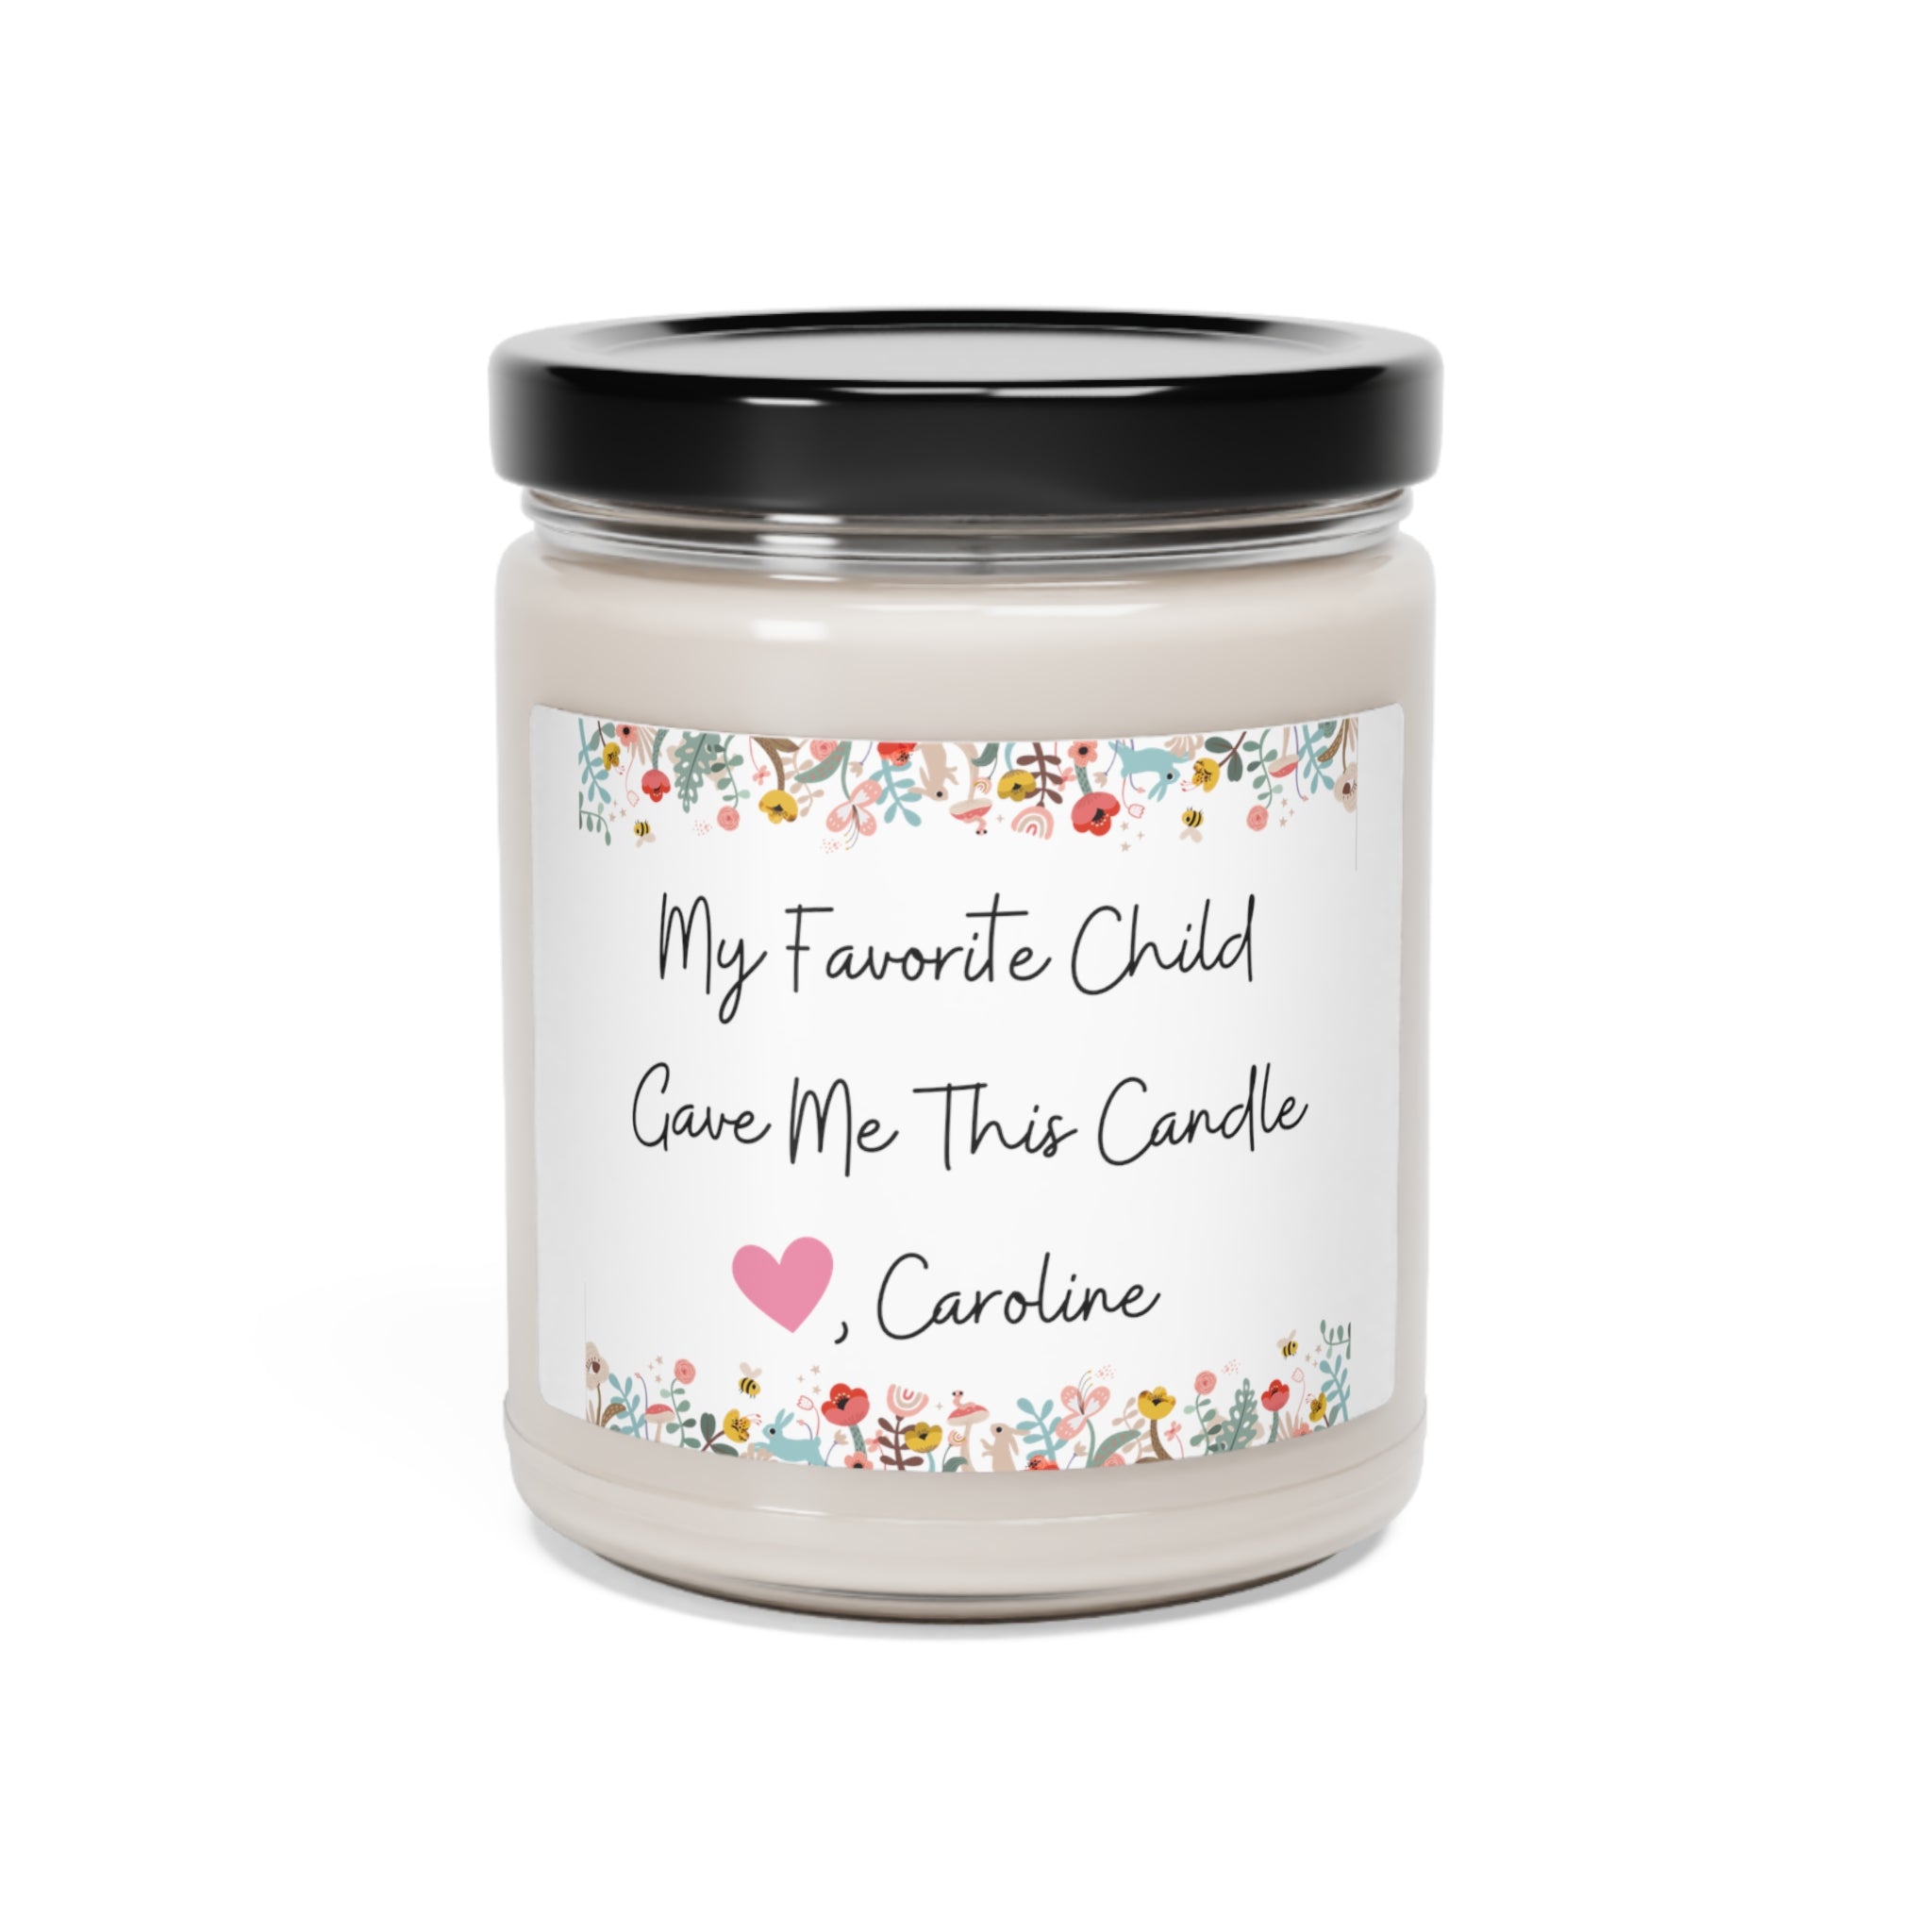 Funny Candle For Mom- Personalization Available